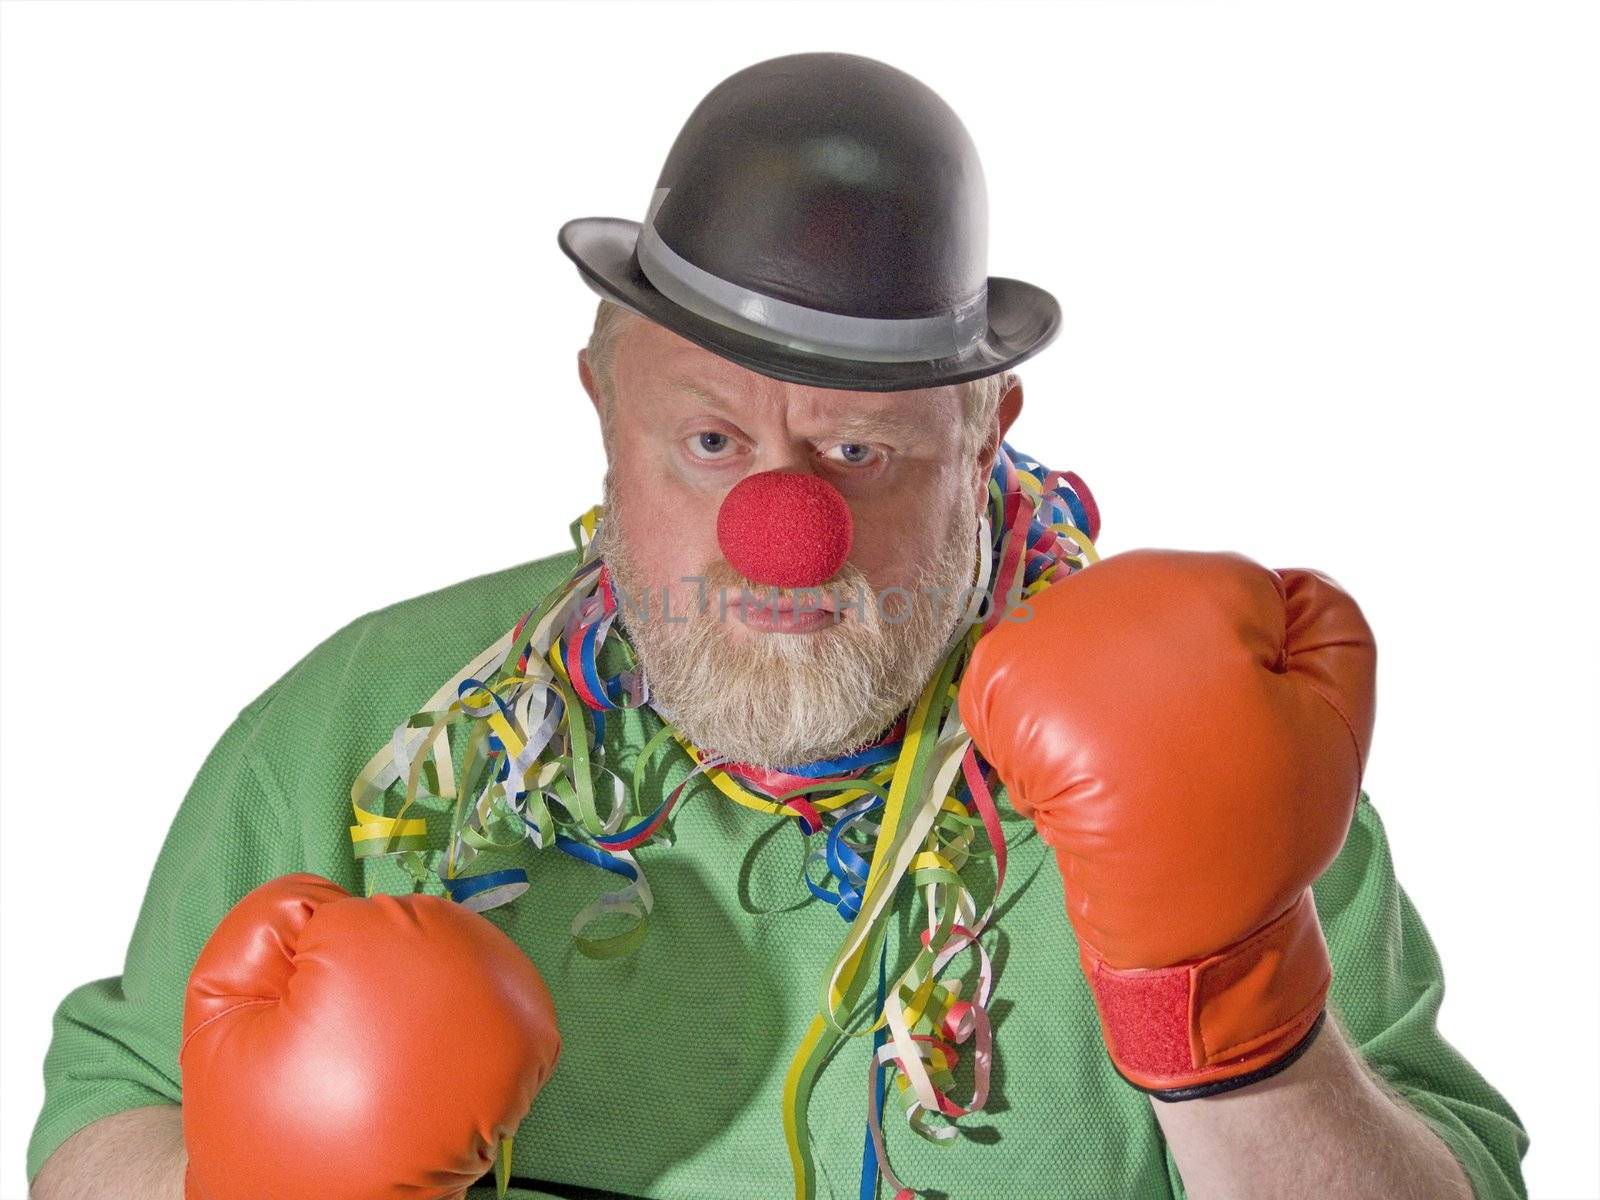 Boxing Clown by Teamarbeit